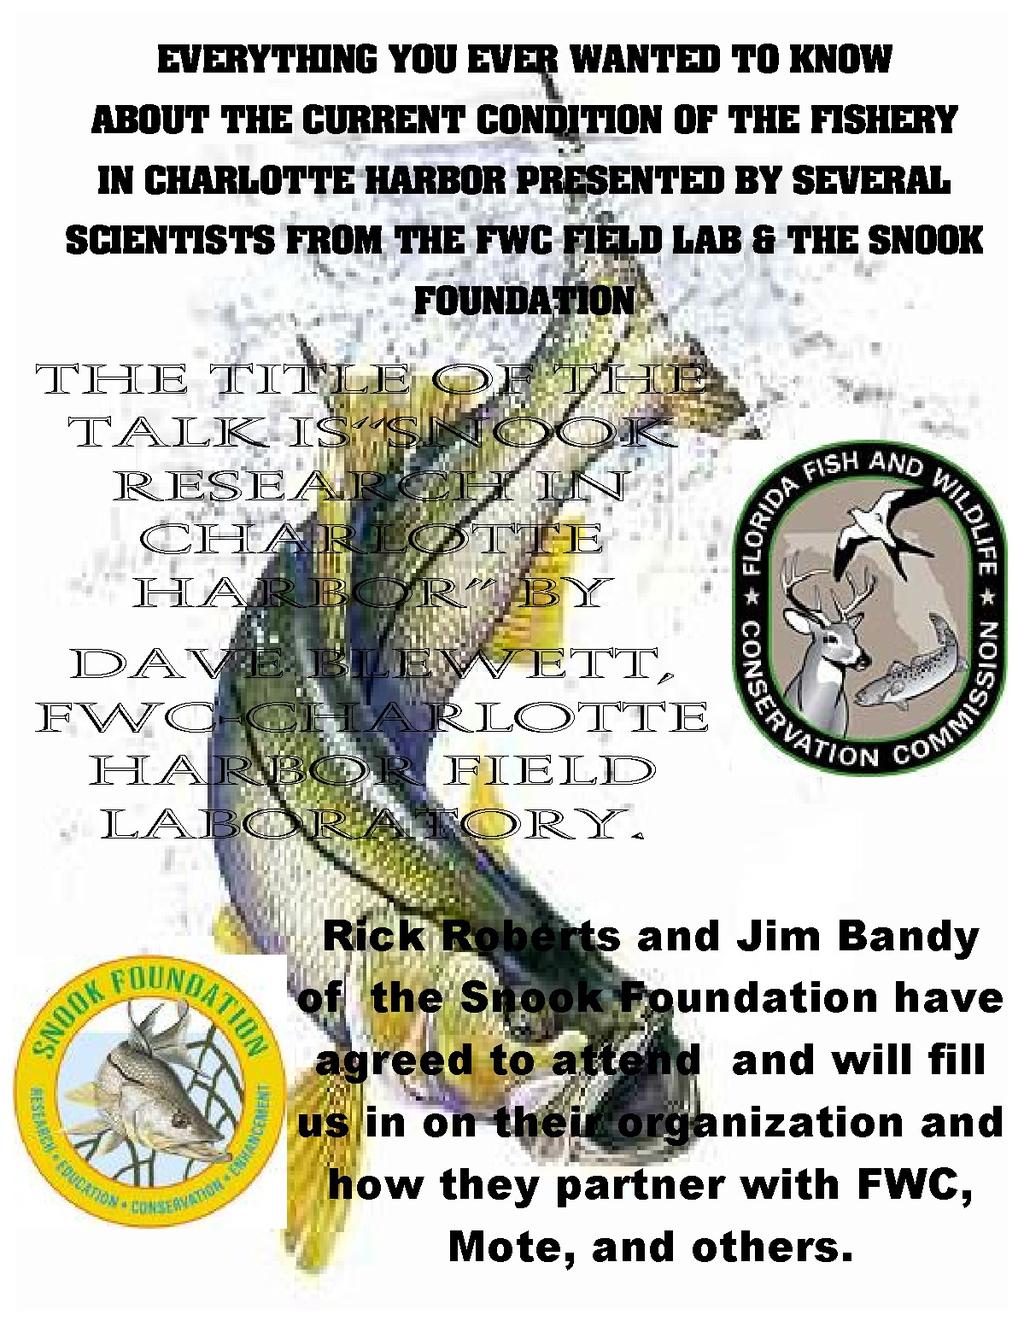 They will be speaking on SNOOK RESEARCH IN CHARLOTTE HARBOR FOR FURTHER INFO CALL 637-7305 OR 639-6546 Mission Statement The stated purpose of CCA is to advise and educate the public on